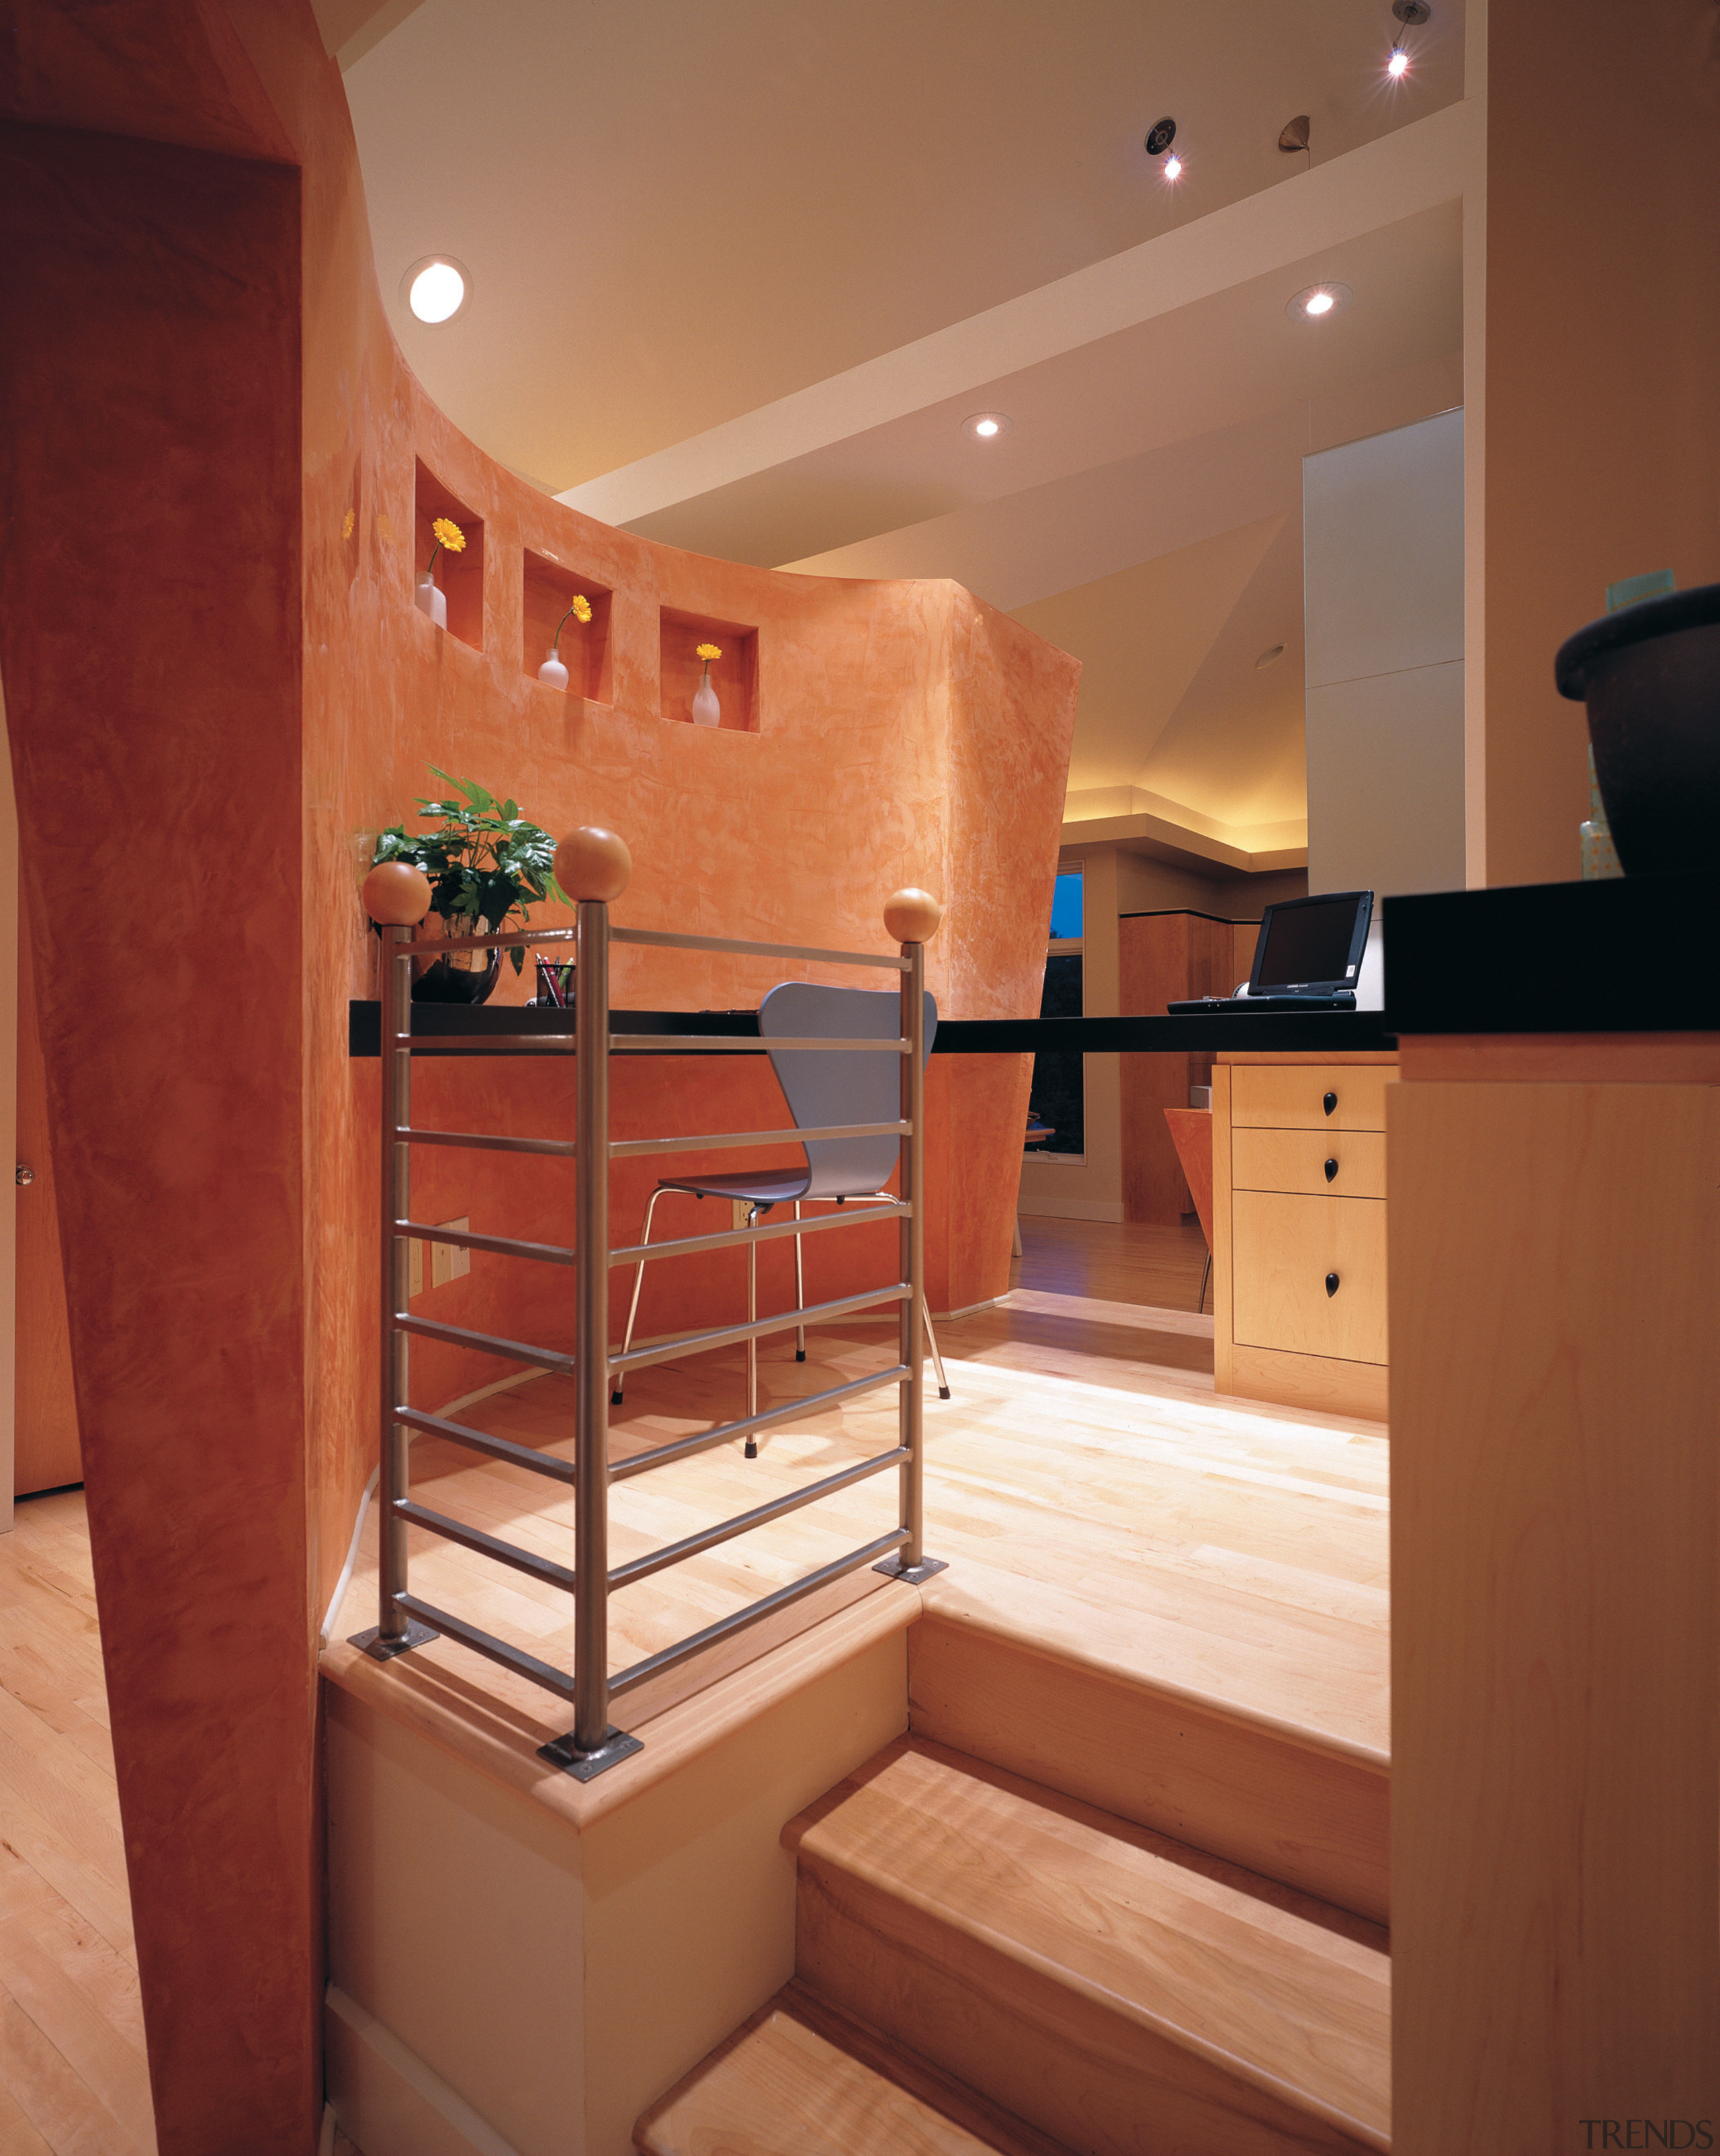 View of the kitchen area - View of cabinetry, ceiling, floor, flooring, handrail, hardwood, interior design, stairs, brown, orange